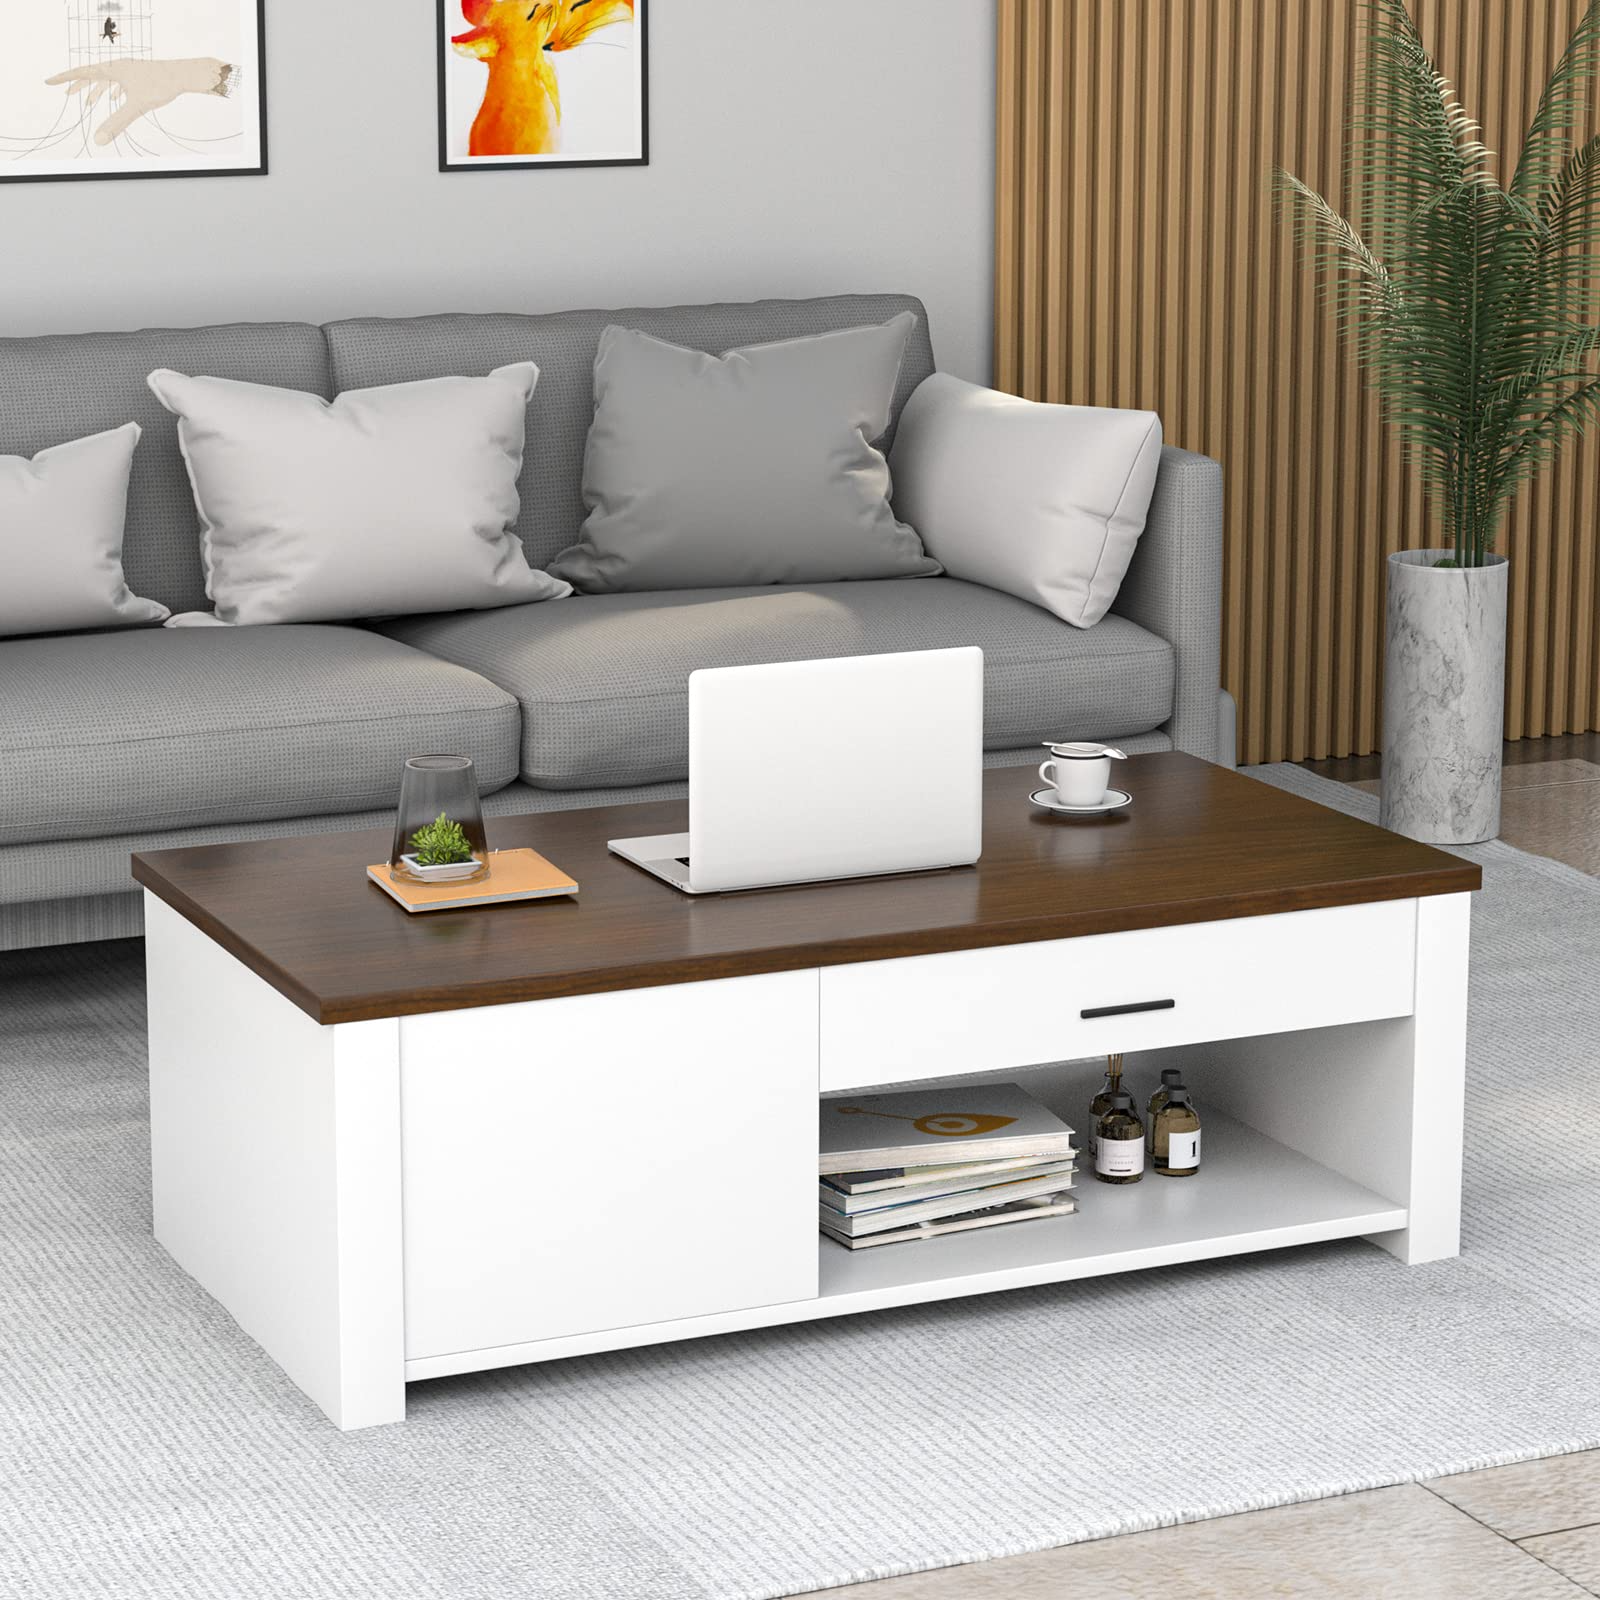 Modern Couch Table with Front & Back Drawers & Compartments, 47.2"x23.6"x16.1"